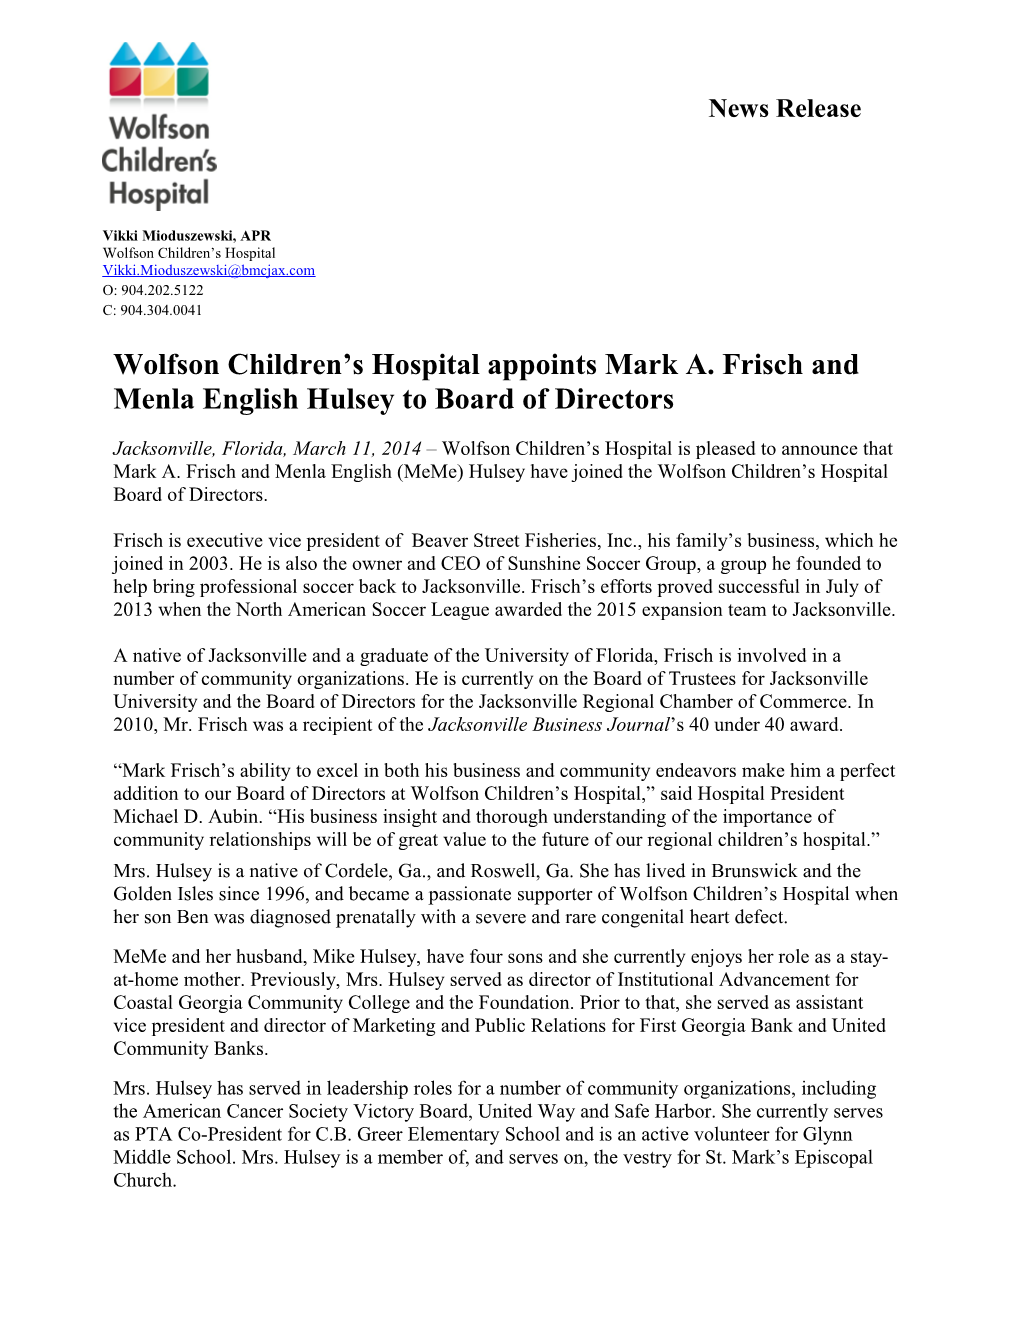 Wolfson Children S Hospital Appoints Mark A. Frisch and Menla English Hulsey to Board